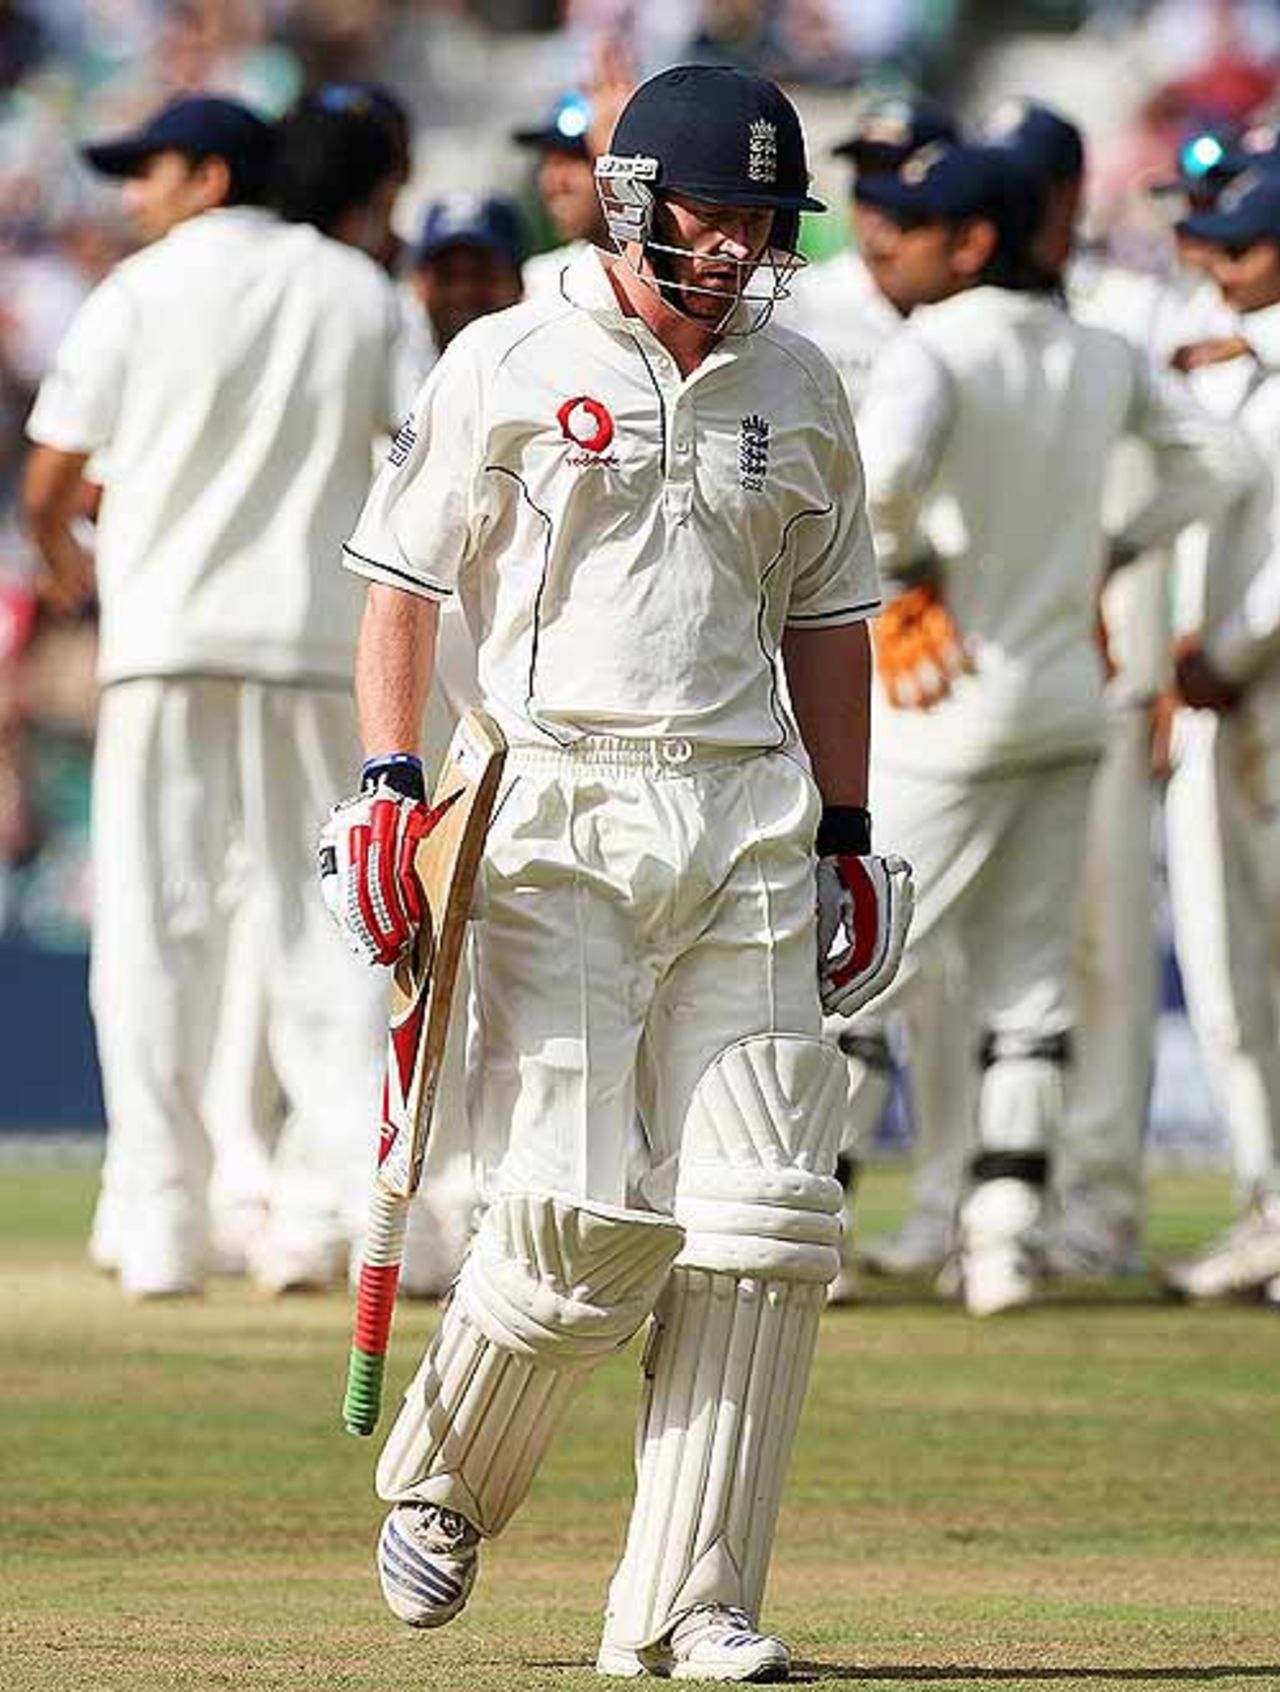 Paul Collingwood trudges back to the pavilion after being dismissed by Sreesanth, England v India, 3rd Test, The Oval, 5th day, August 13, 2007